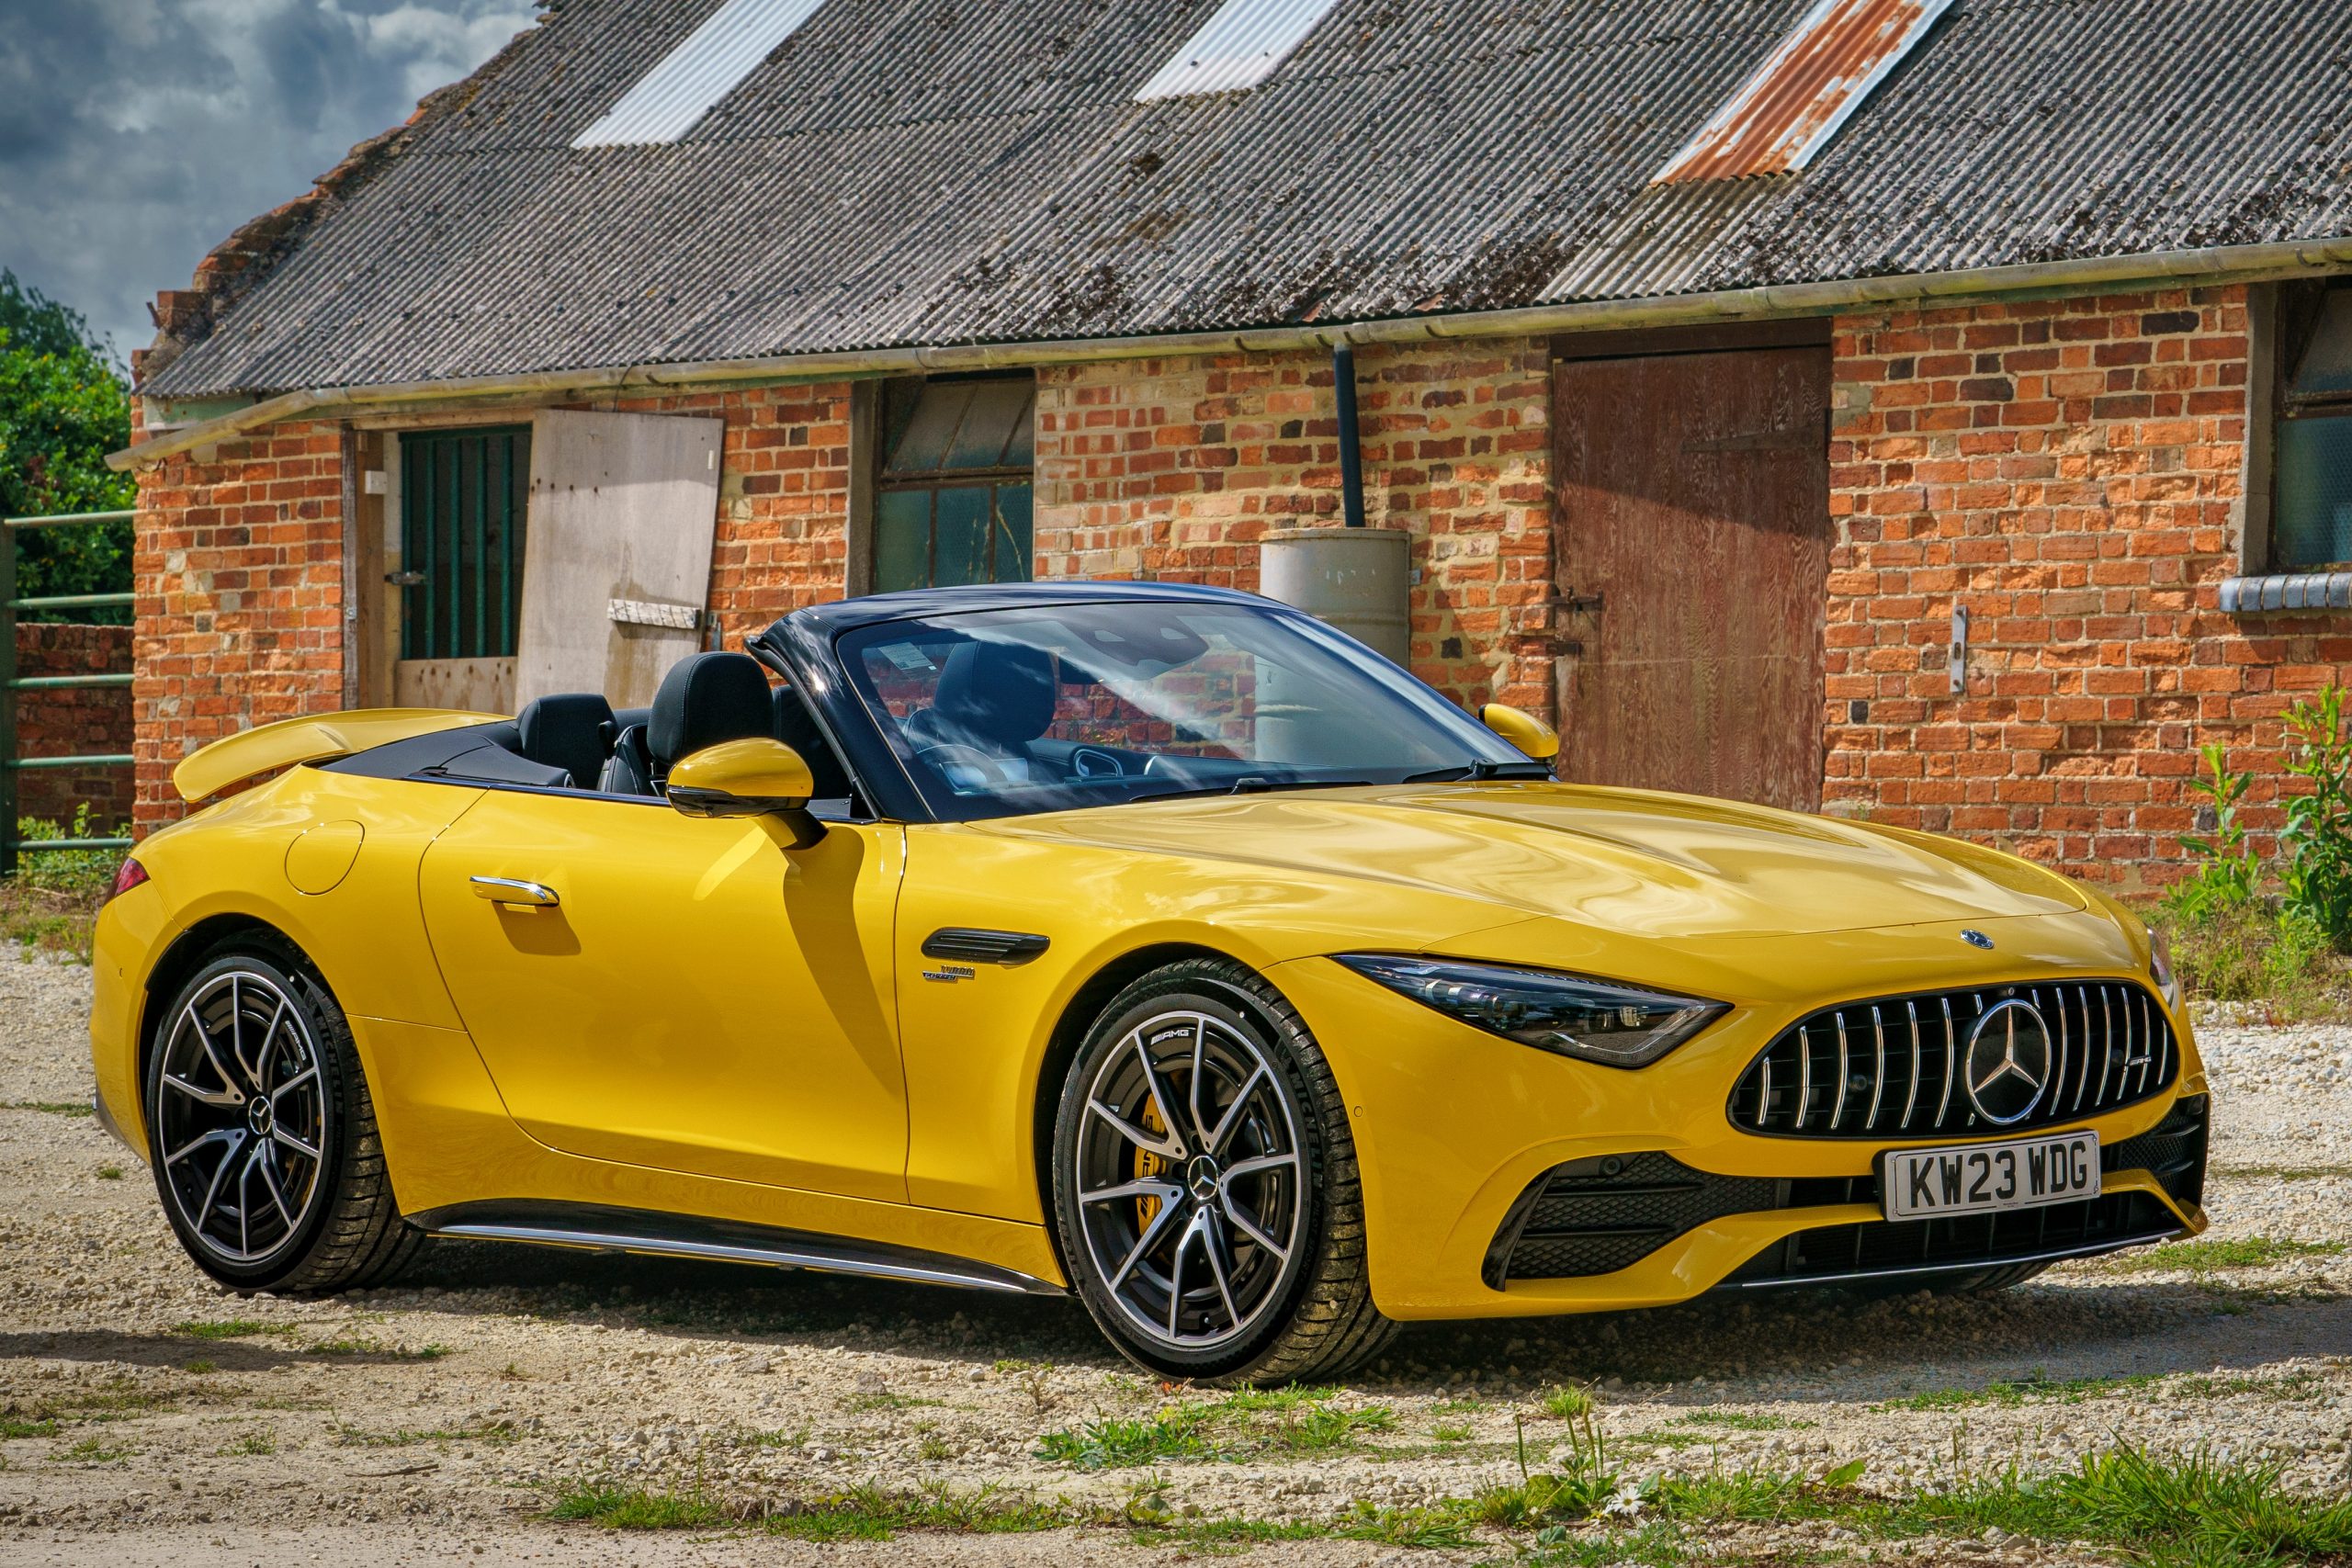 I drove the new £100,000 Mercedes-AMG SL 43 – it’s packed with F1 tech